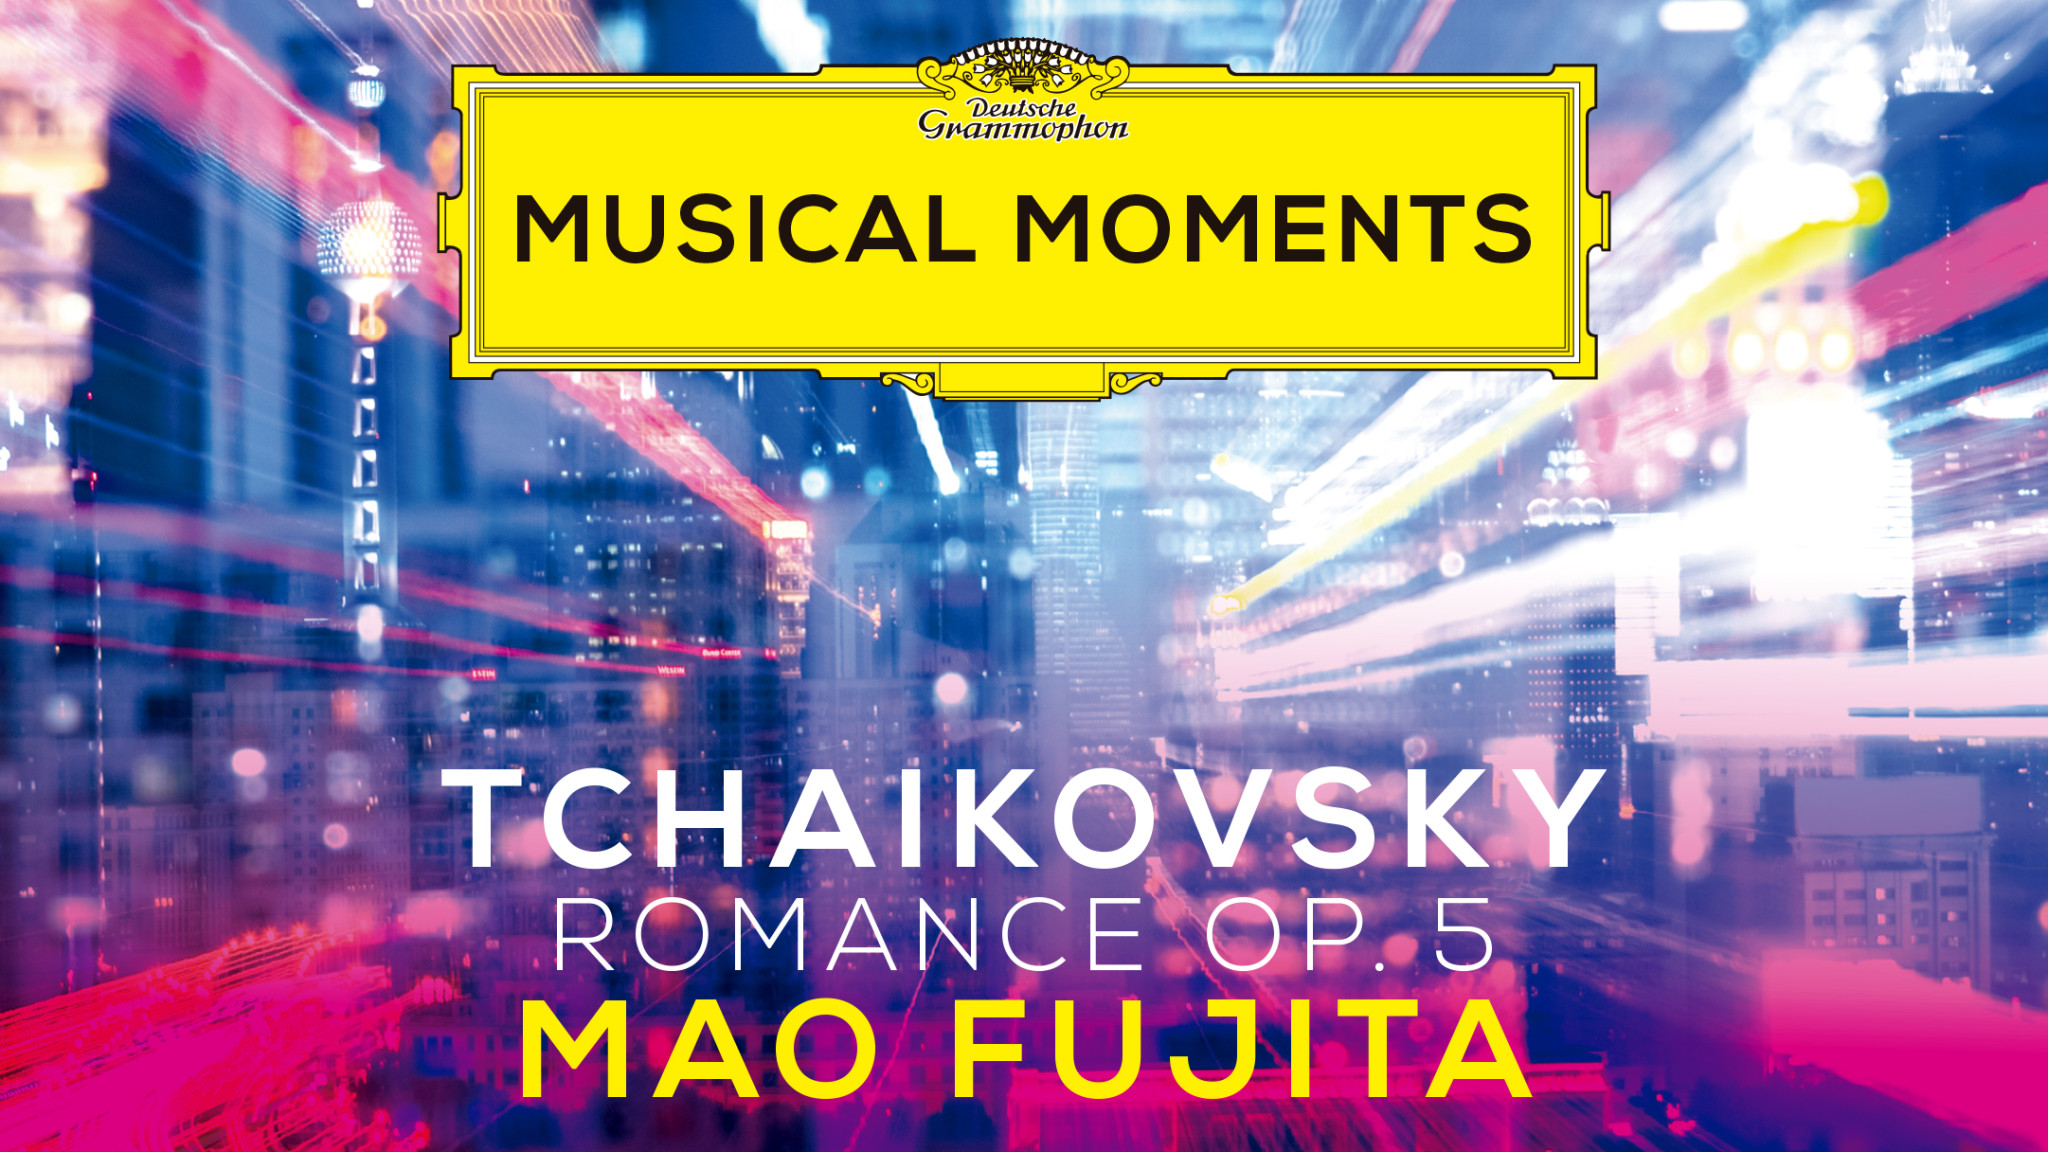 Mao Fujita continues 'Musical Moments' with Tchaikovsky's Romance, op. 5